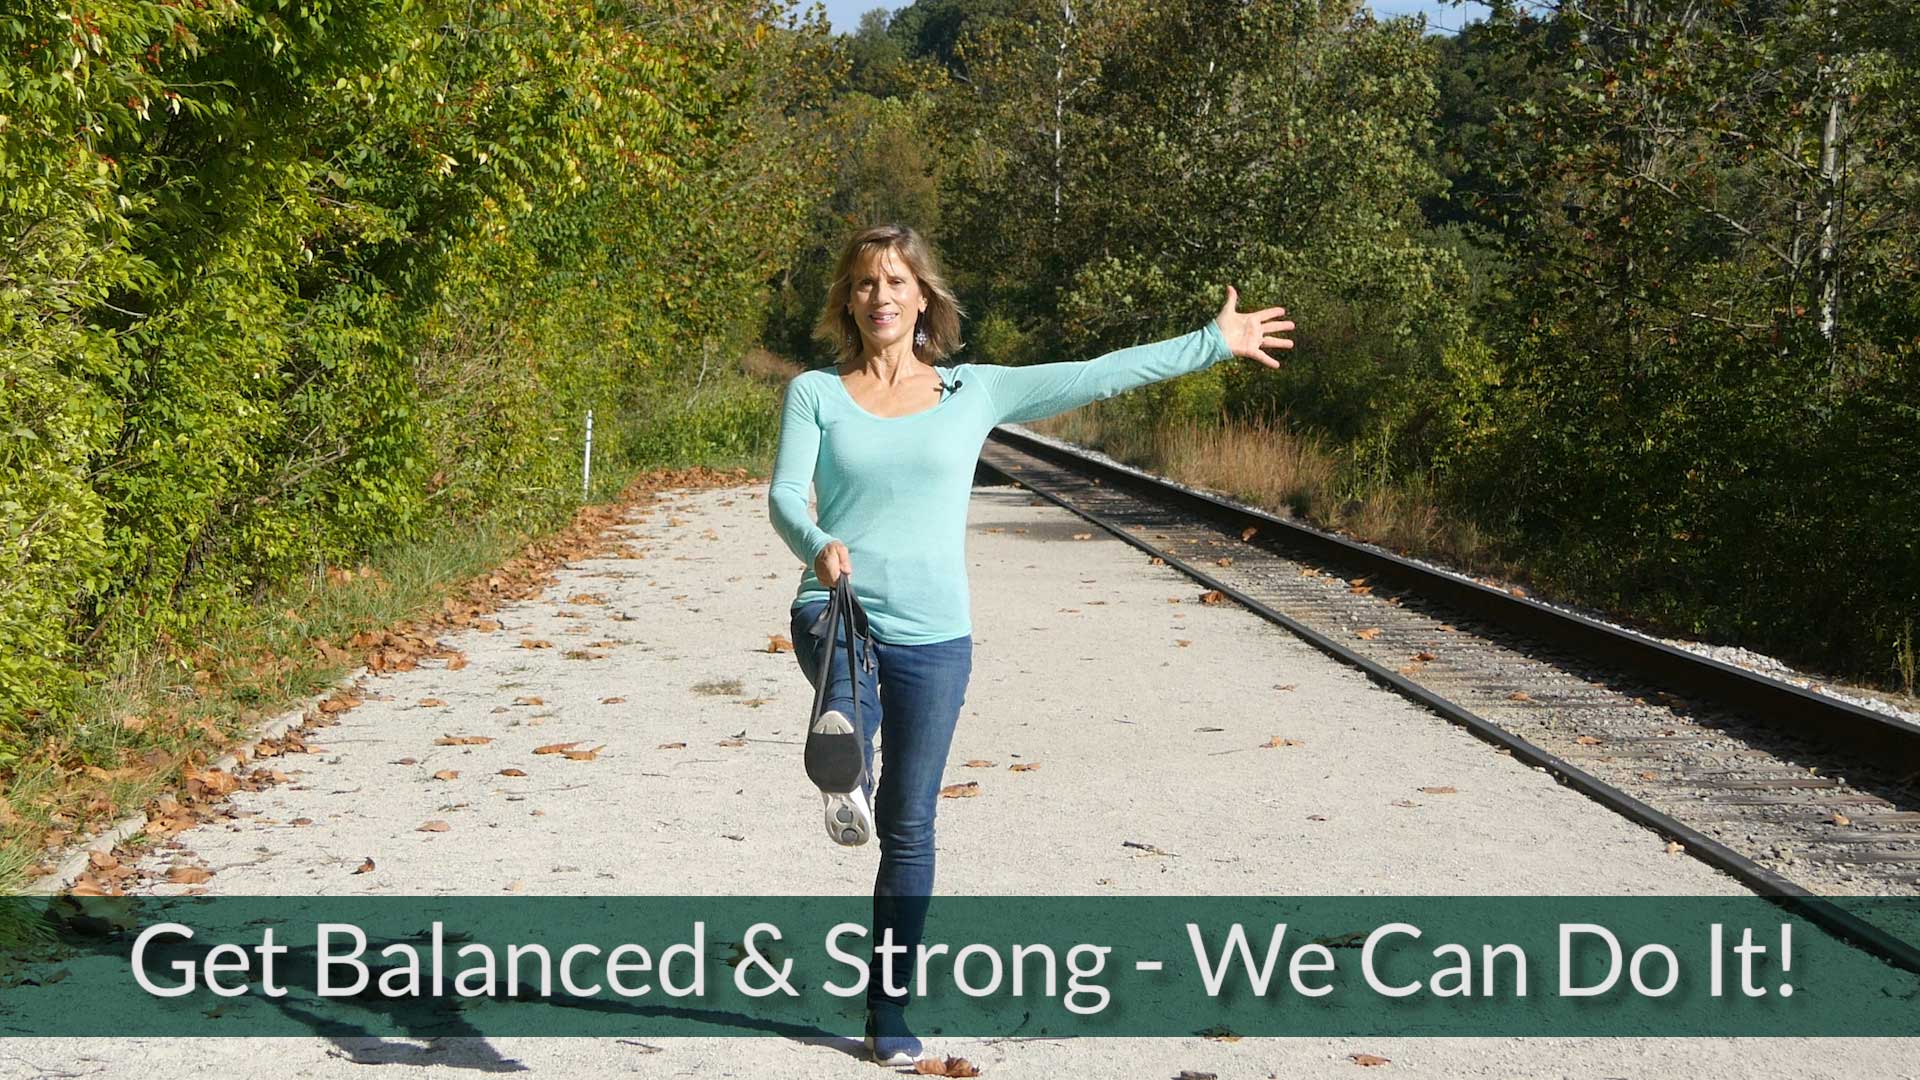 Sherry Zak Morris - Hometown Yoga Practice to Get Balanced and Strong